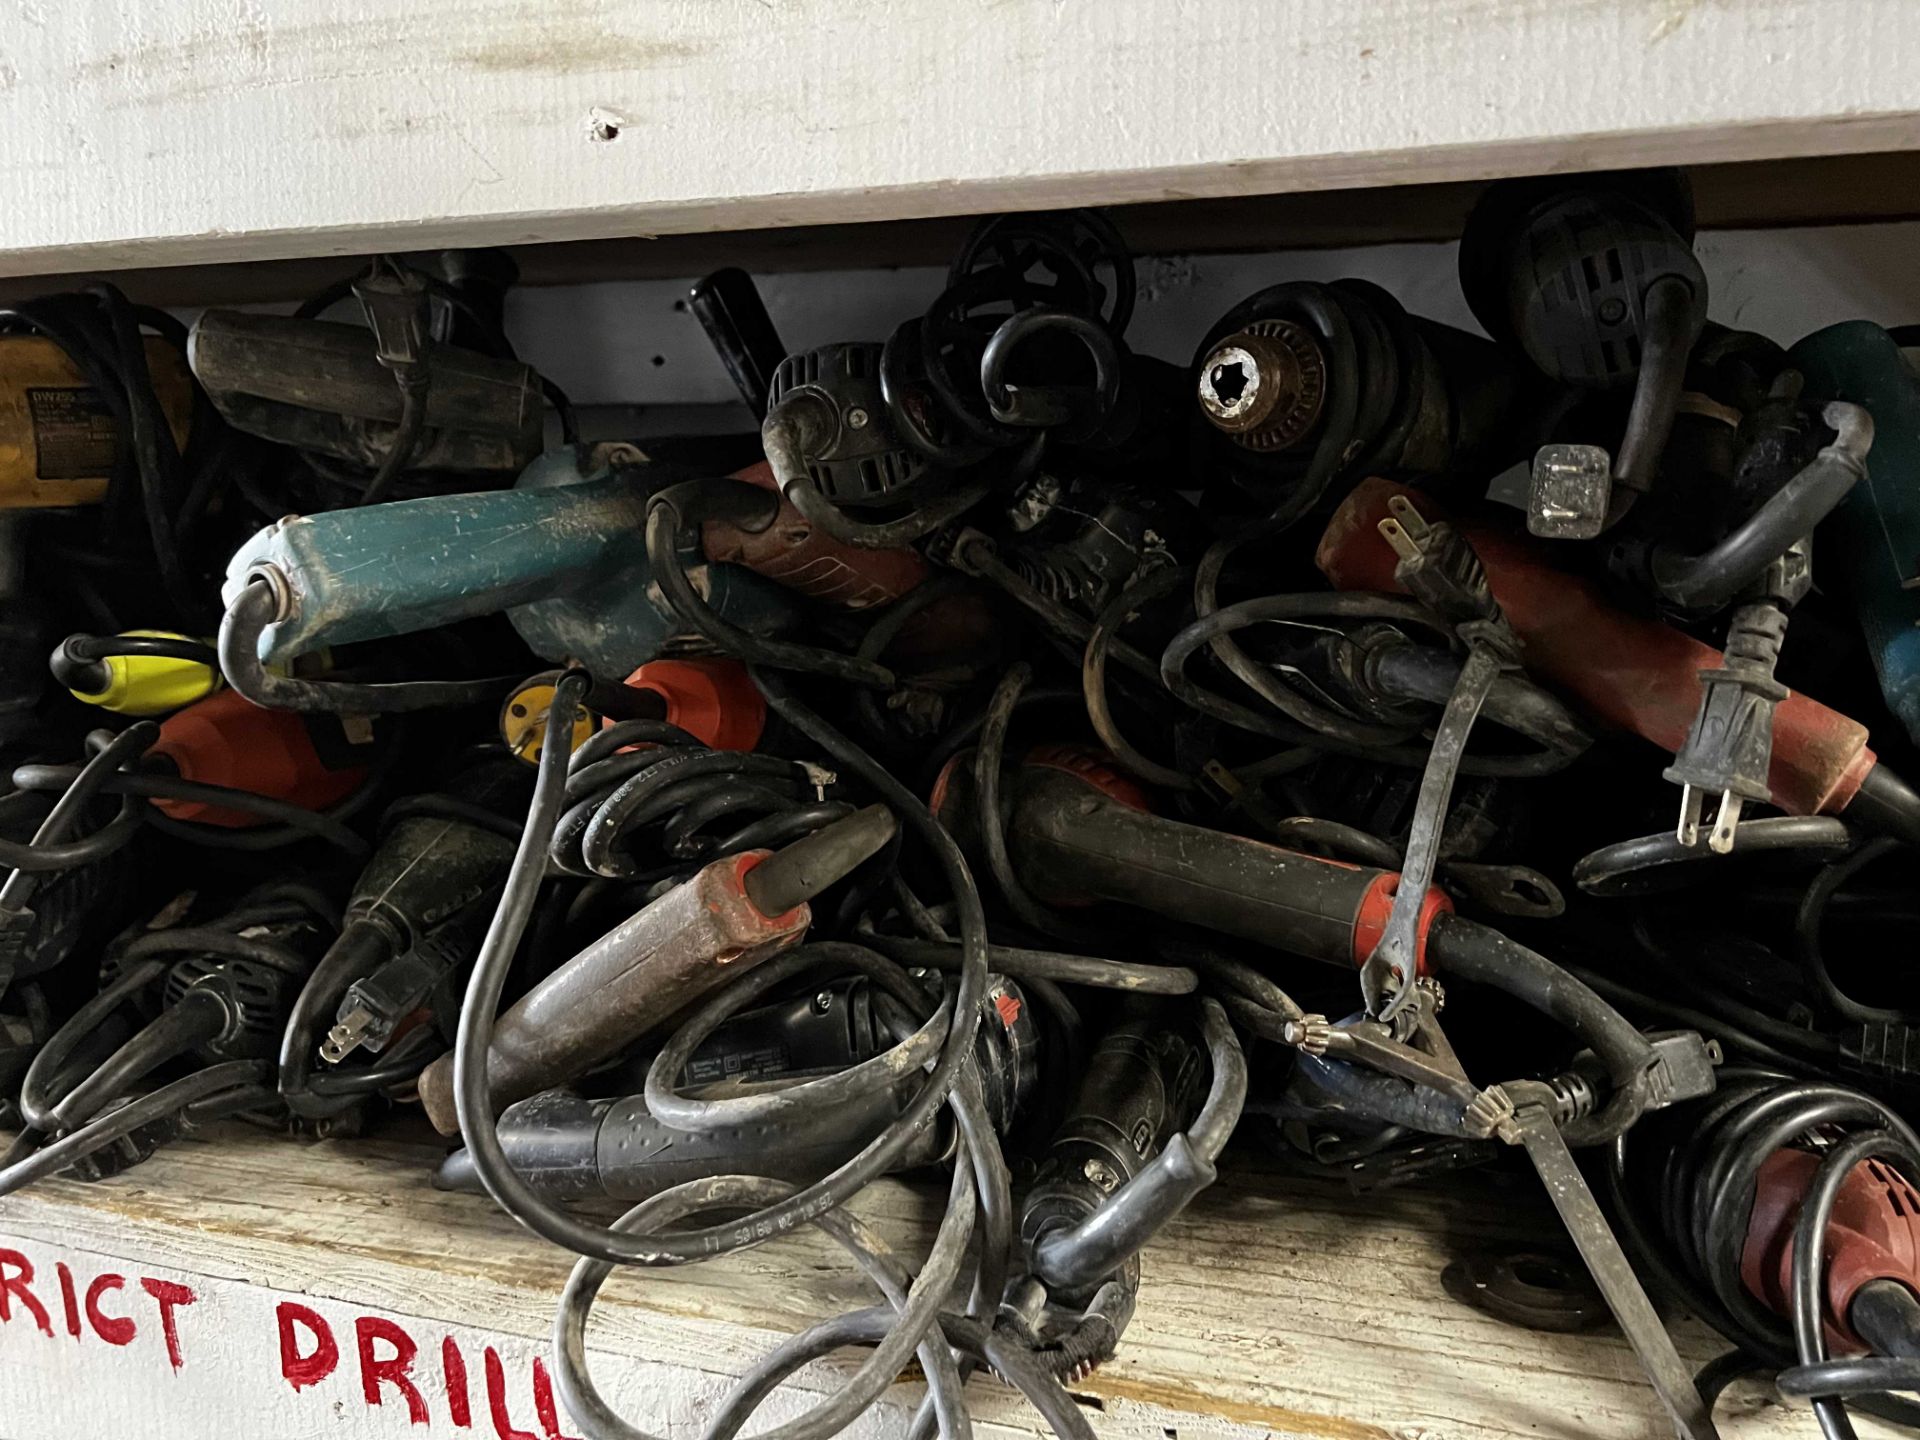 {LOT} Approx. 40 Corded Drills, Hammer Drills, Grinders, & Sanders on Shelf - Image 2 of 5